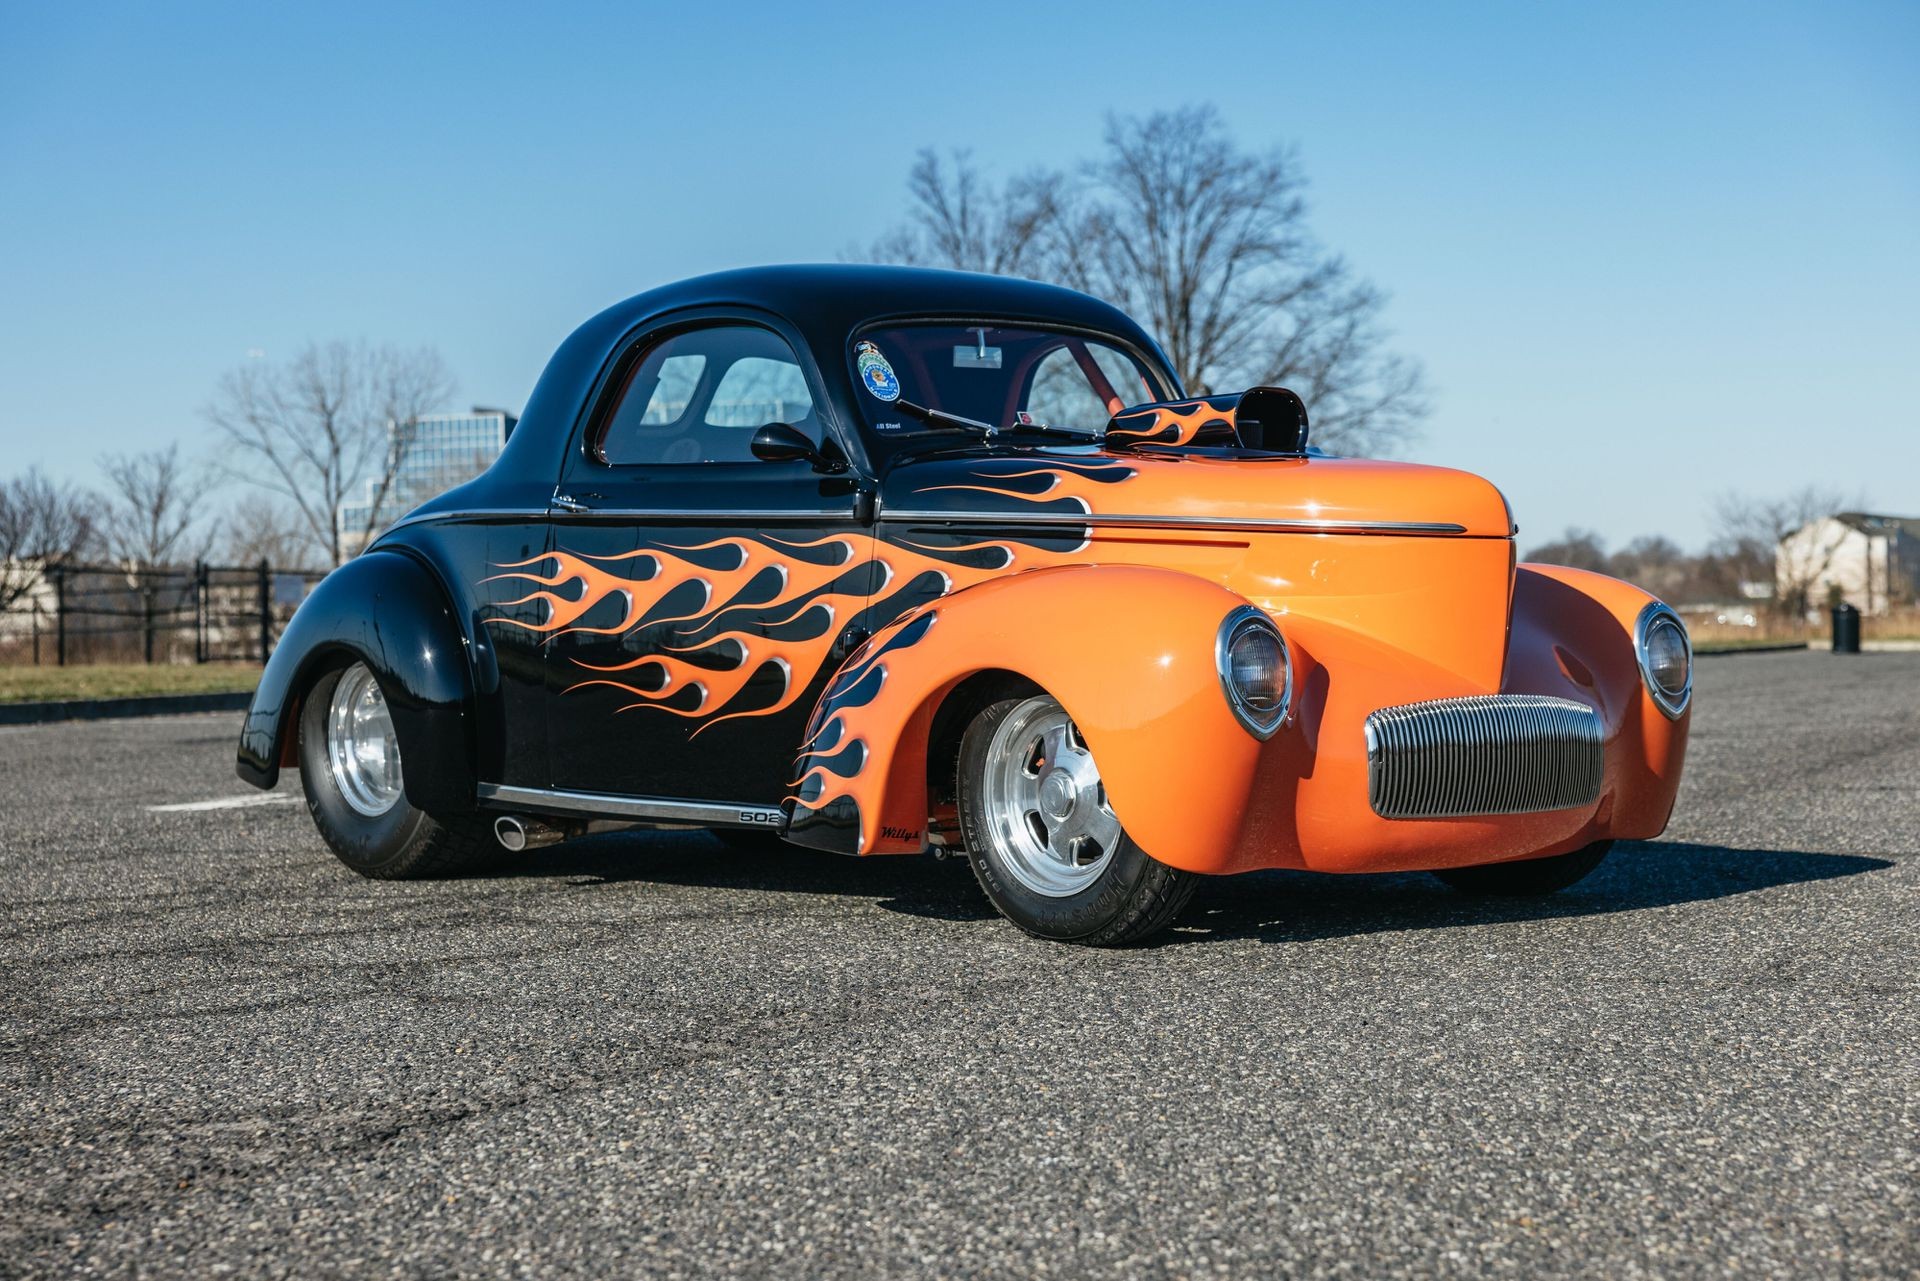 Find of the Day: This 1941 Willys Coupe Hot Rod is on Fire